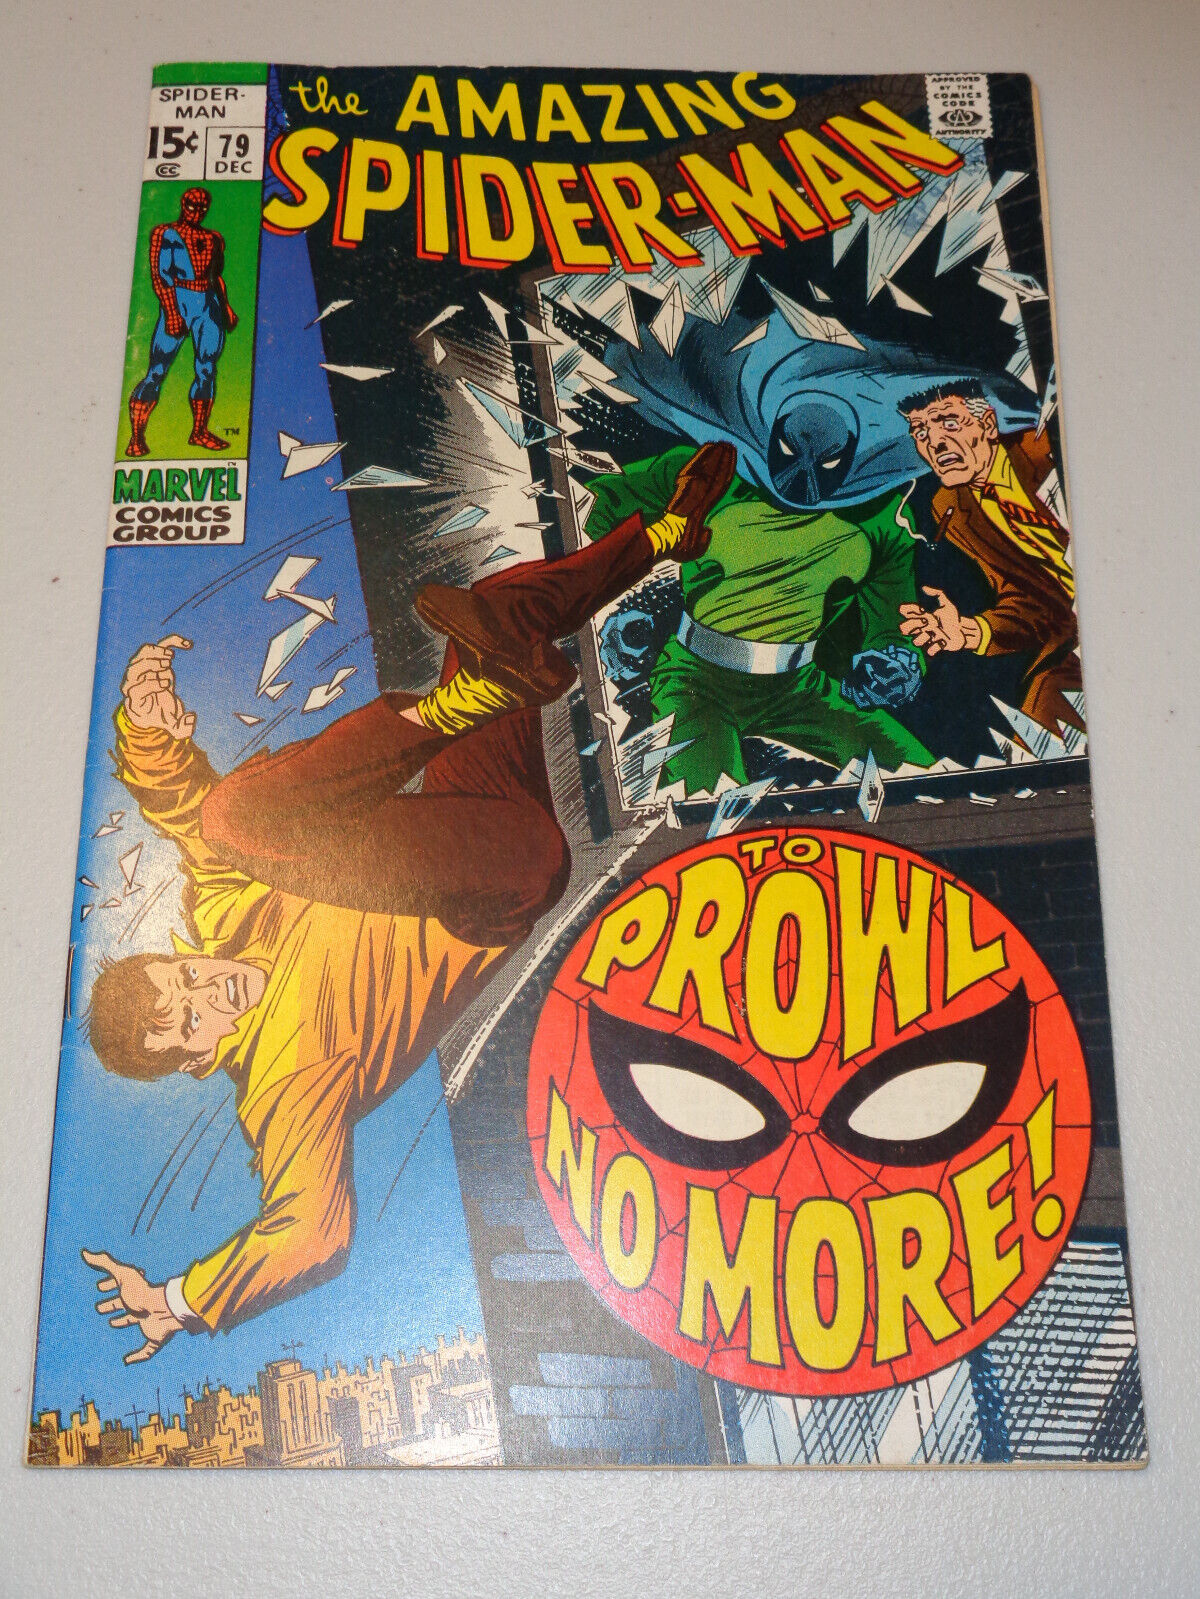 AMAZING SPIDER-MAN #79 (1969 ; 2nd App of Prowler. ; Superb VF+ to VF/NM Cond.)